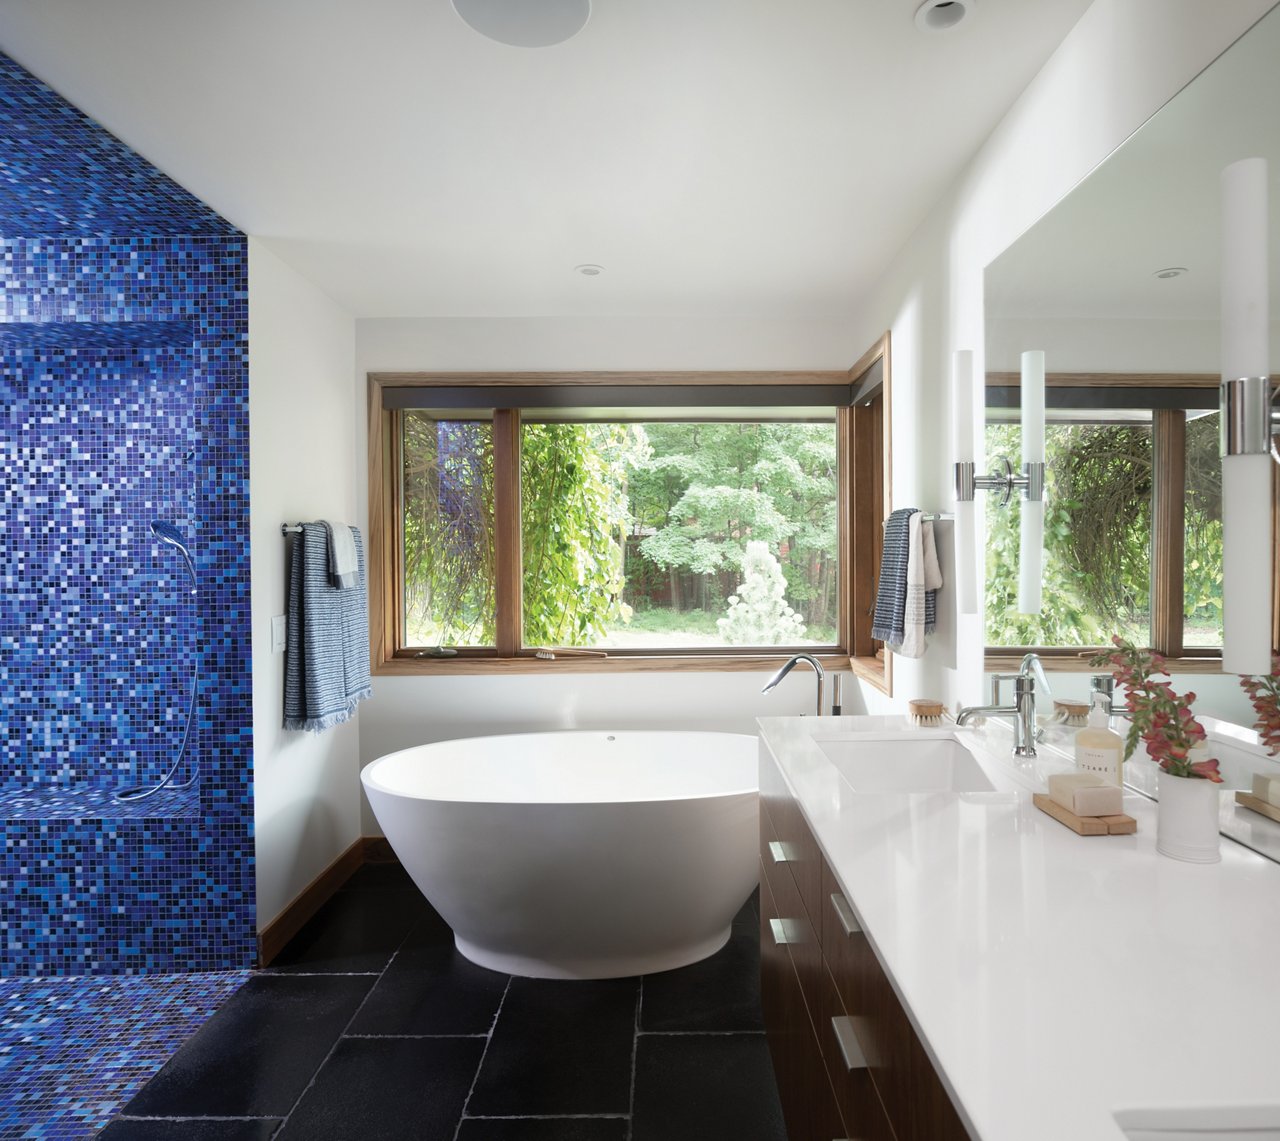 a mid-century modern bathroom with black tile flooring, a blue mosaic tiled shower, a large soaking tub, and a vanity topped with white quartz countertops.